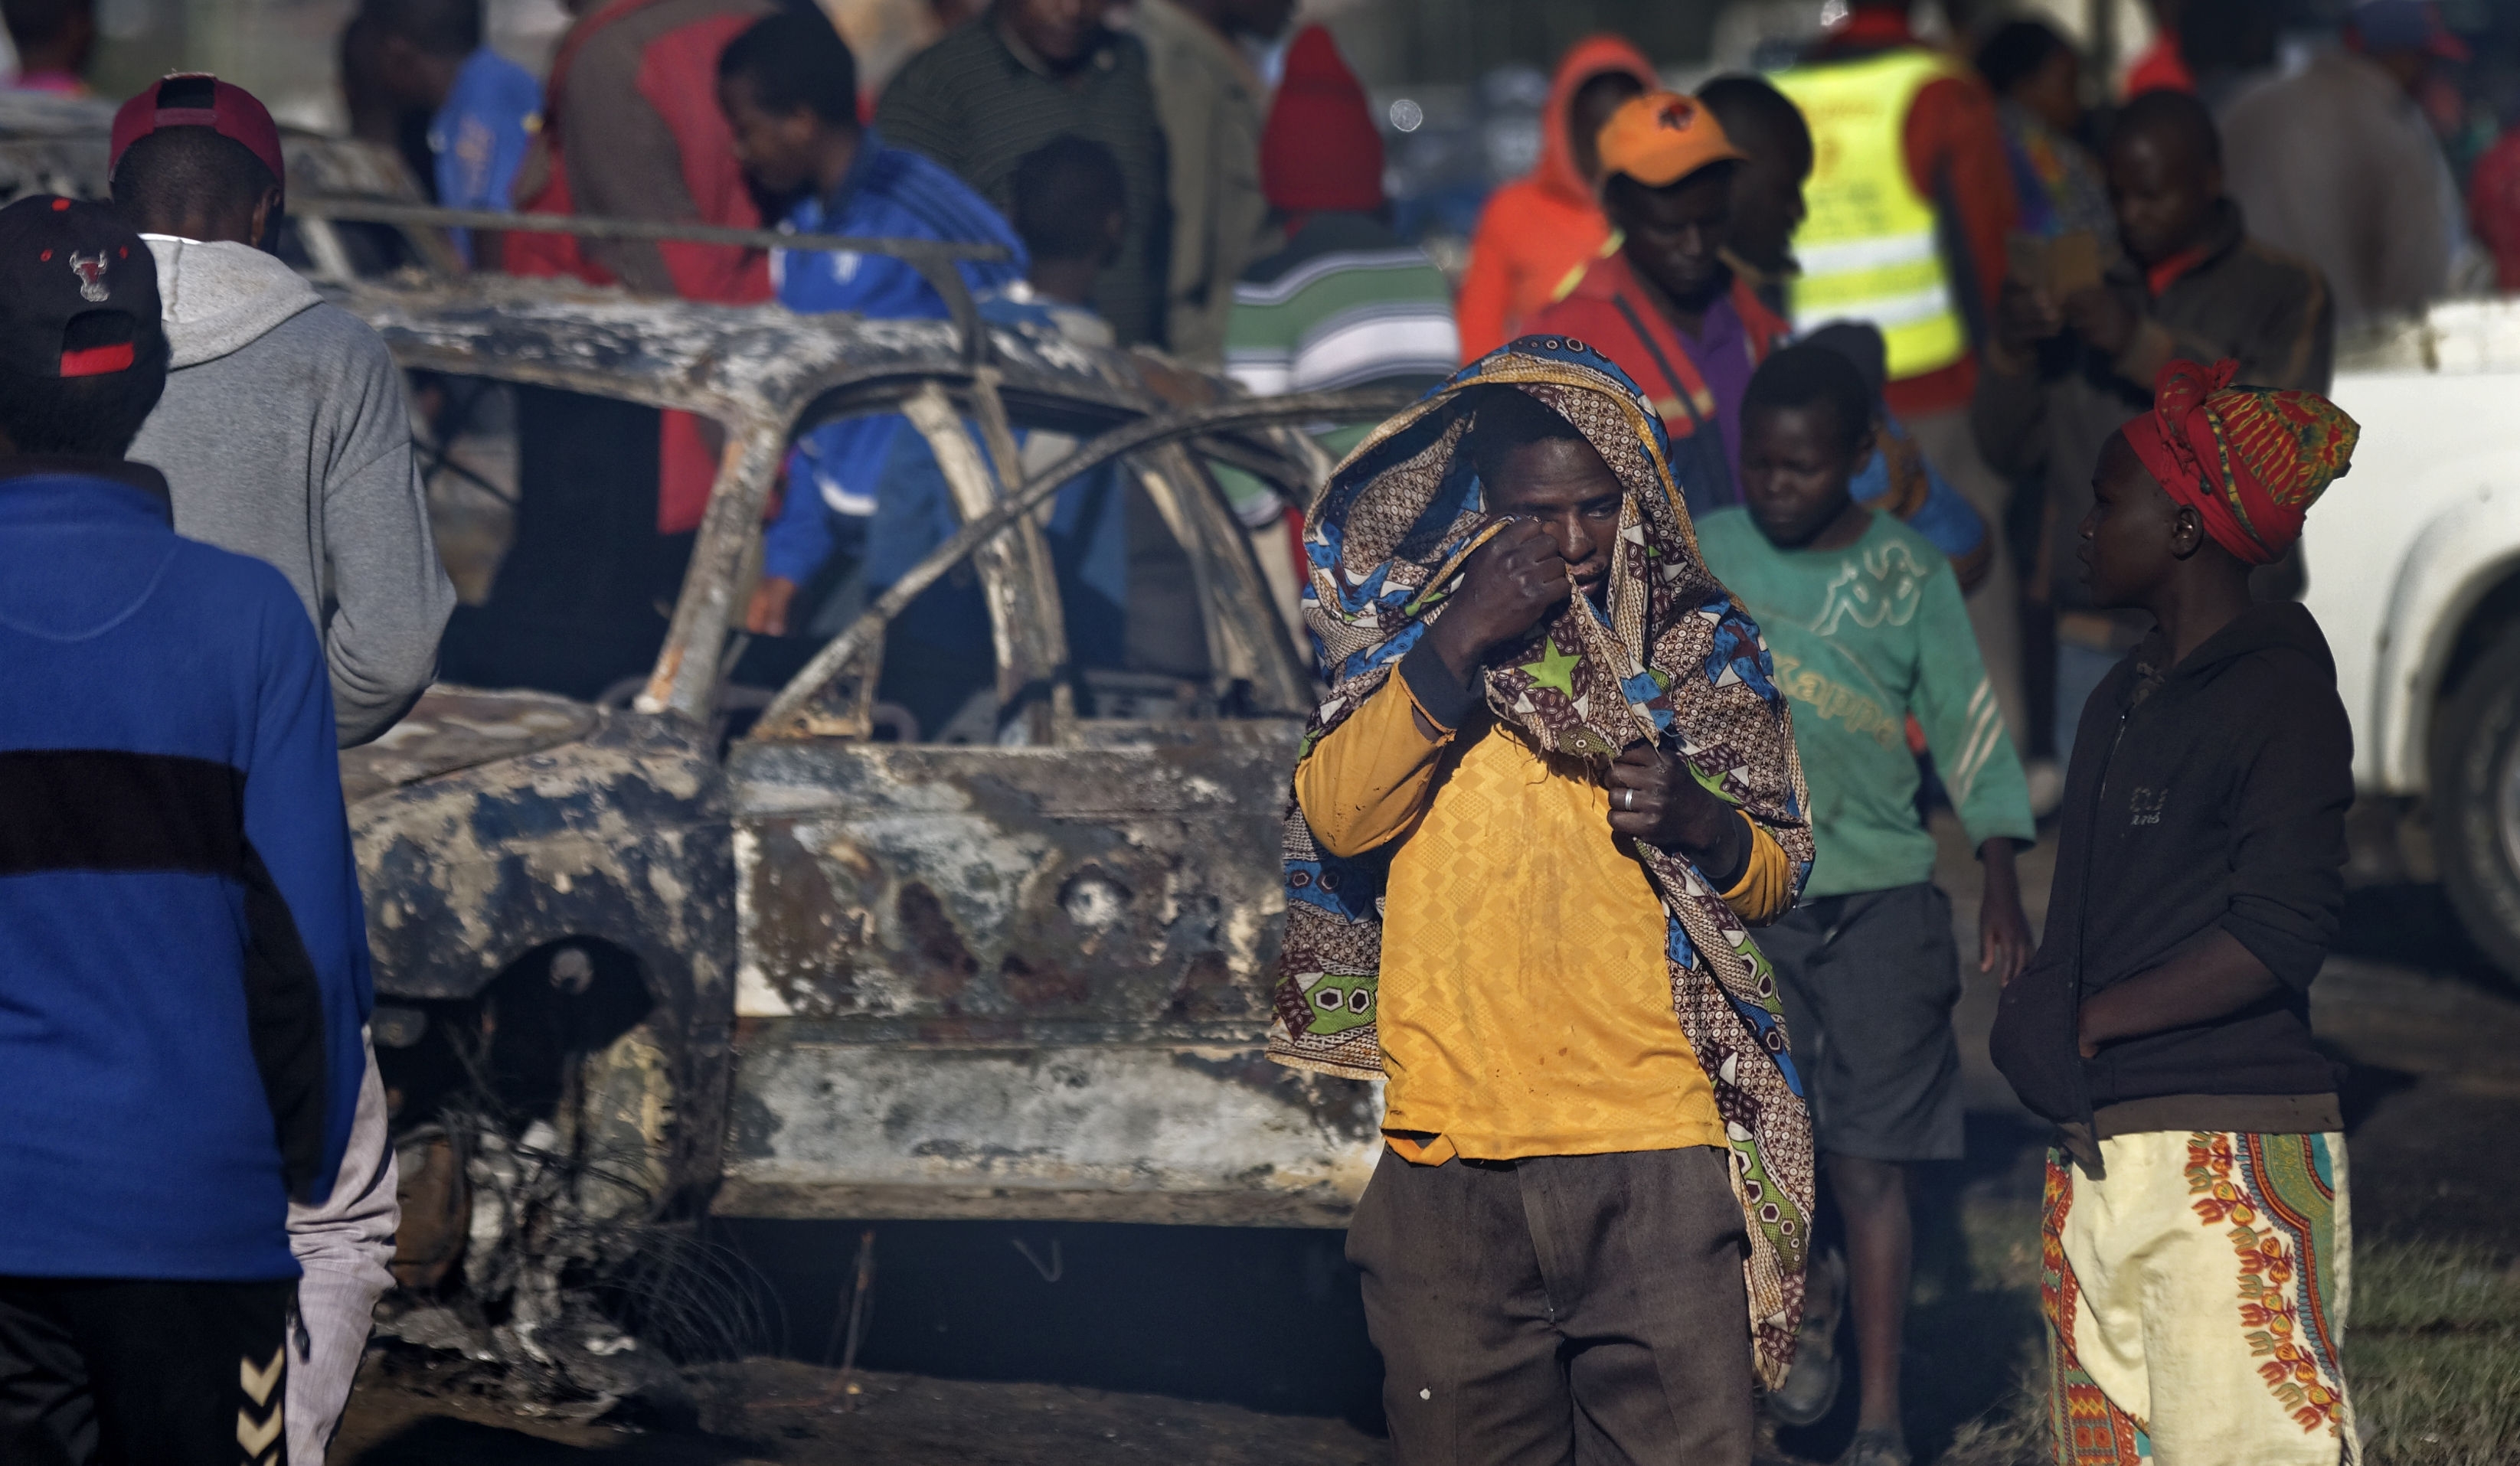 An onlooker wipes his eye as he walks through the still smoldering scene of an accident involving a tanker near Naivasha, in Kenya Sunday, Dec. 11, 2016. The tanker carrying volatile gas slammed into other vehicles and burst into flames on a major road in Kenya, killing dozens of people, officials said early Sunday.